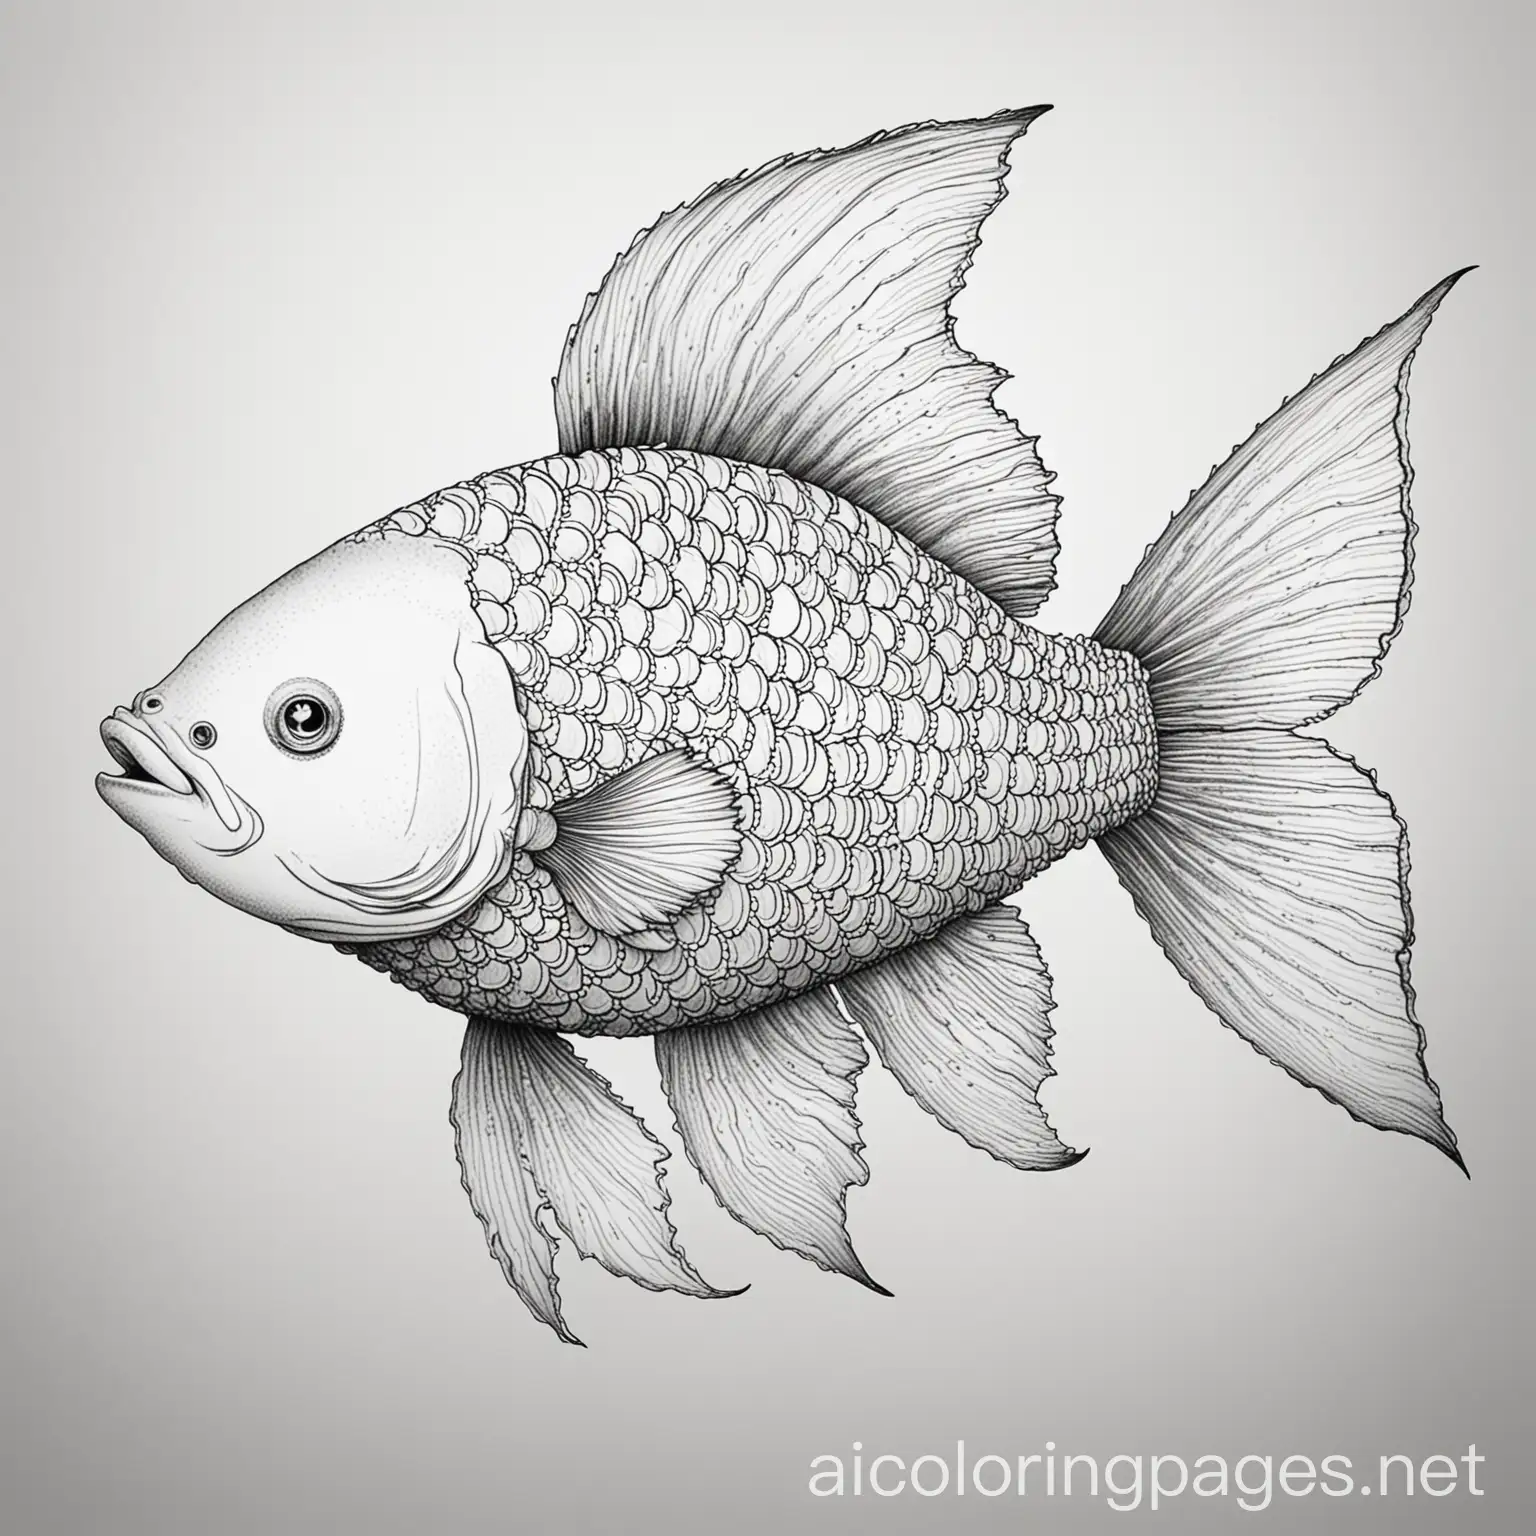 Detailed-Coloring-Page-of-a-Majestic-Fish-with-Unique-Features